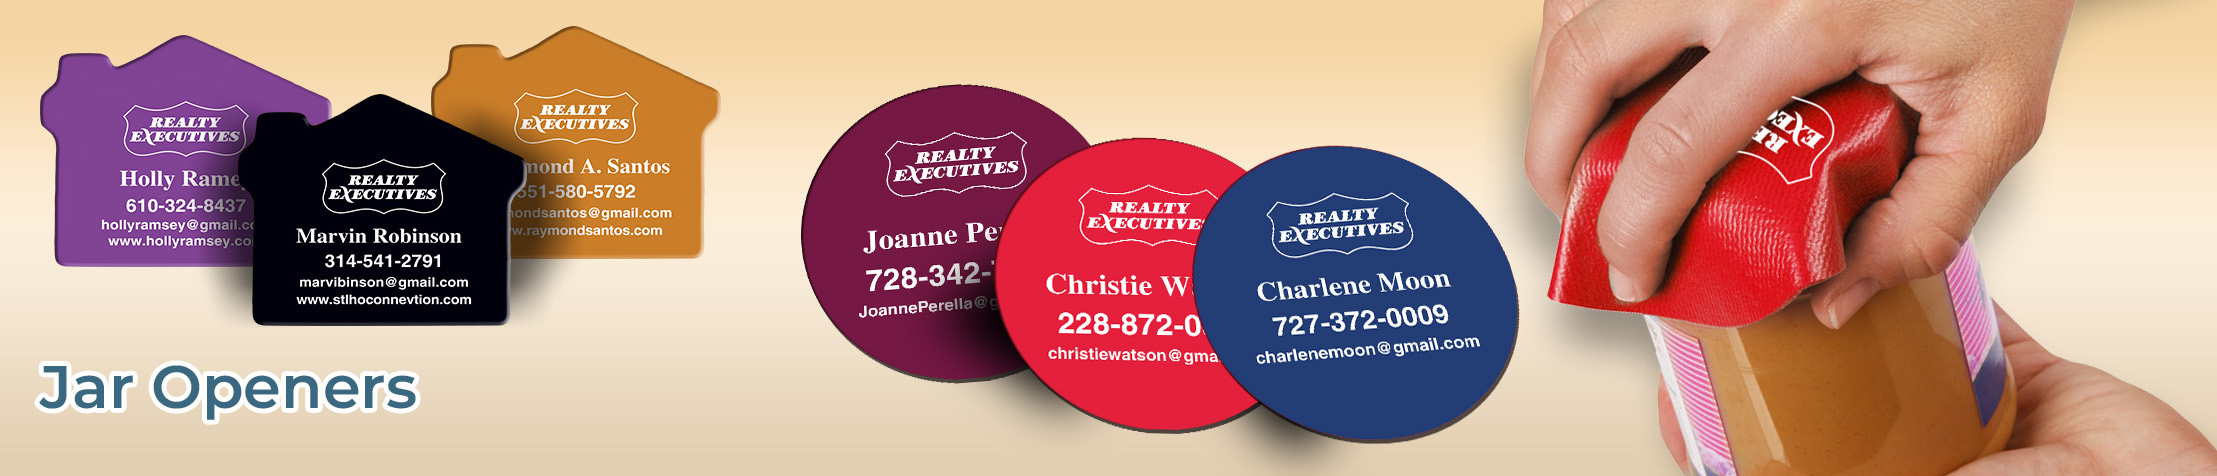 Realty Executives Real Estate Personalized Jar Opener - Promotional products: Jar Openers | BestPrintBuy.com